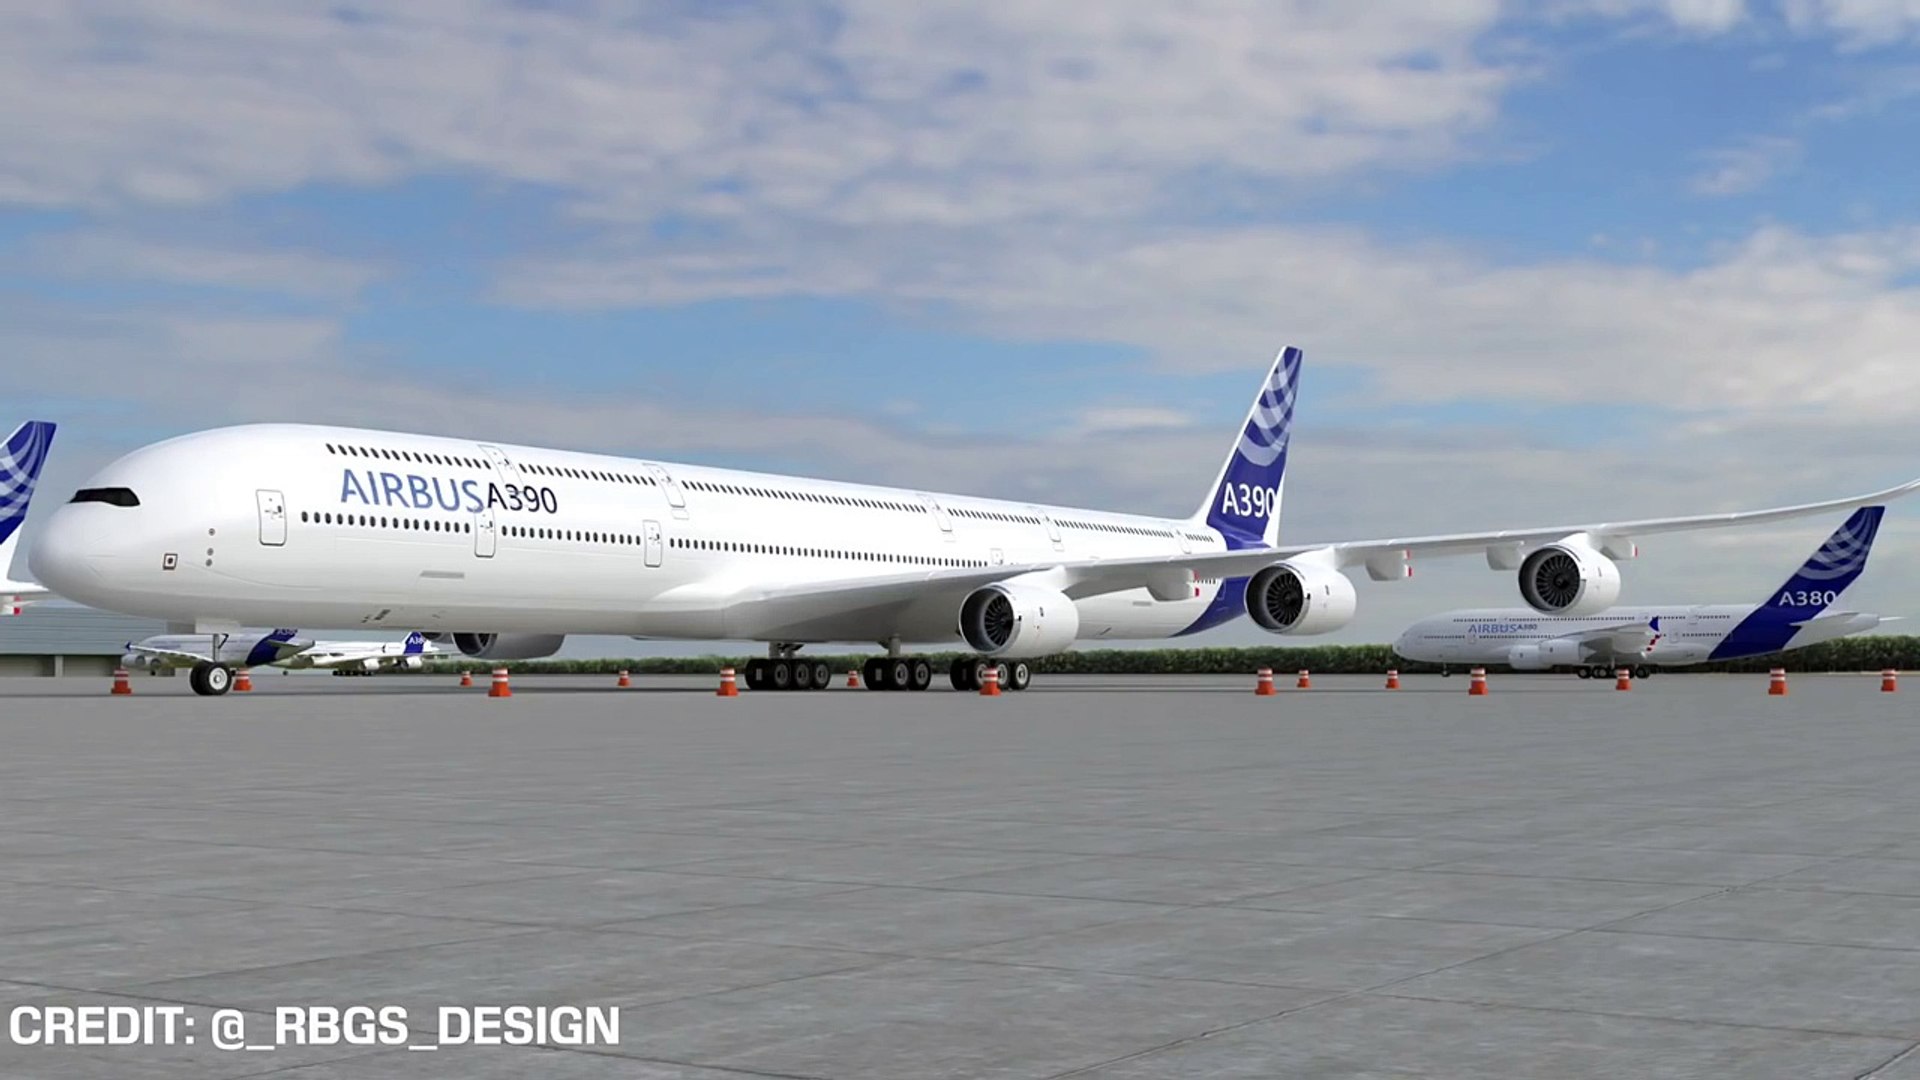 The AIRBUS A390 Revealed - Dailymotion Video